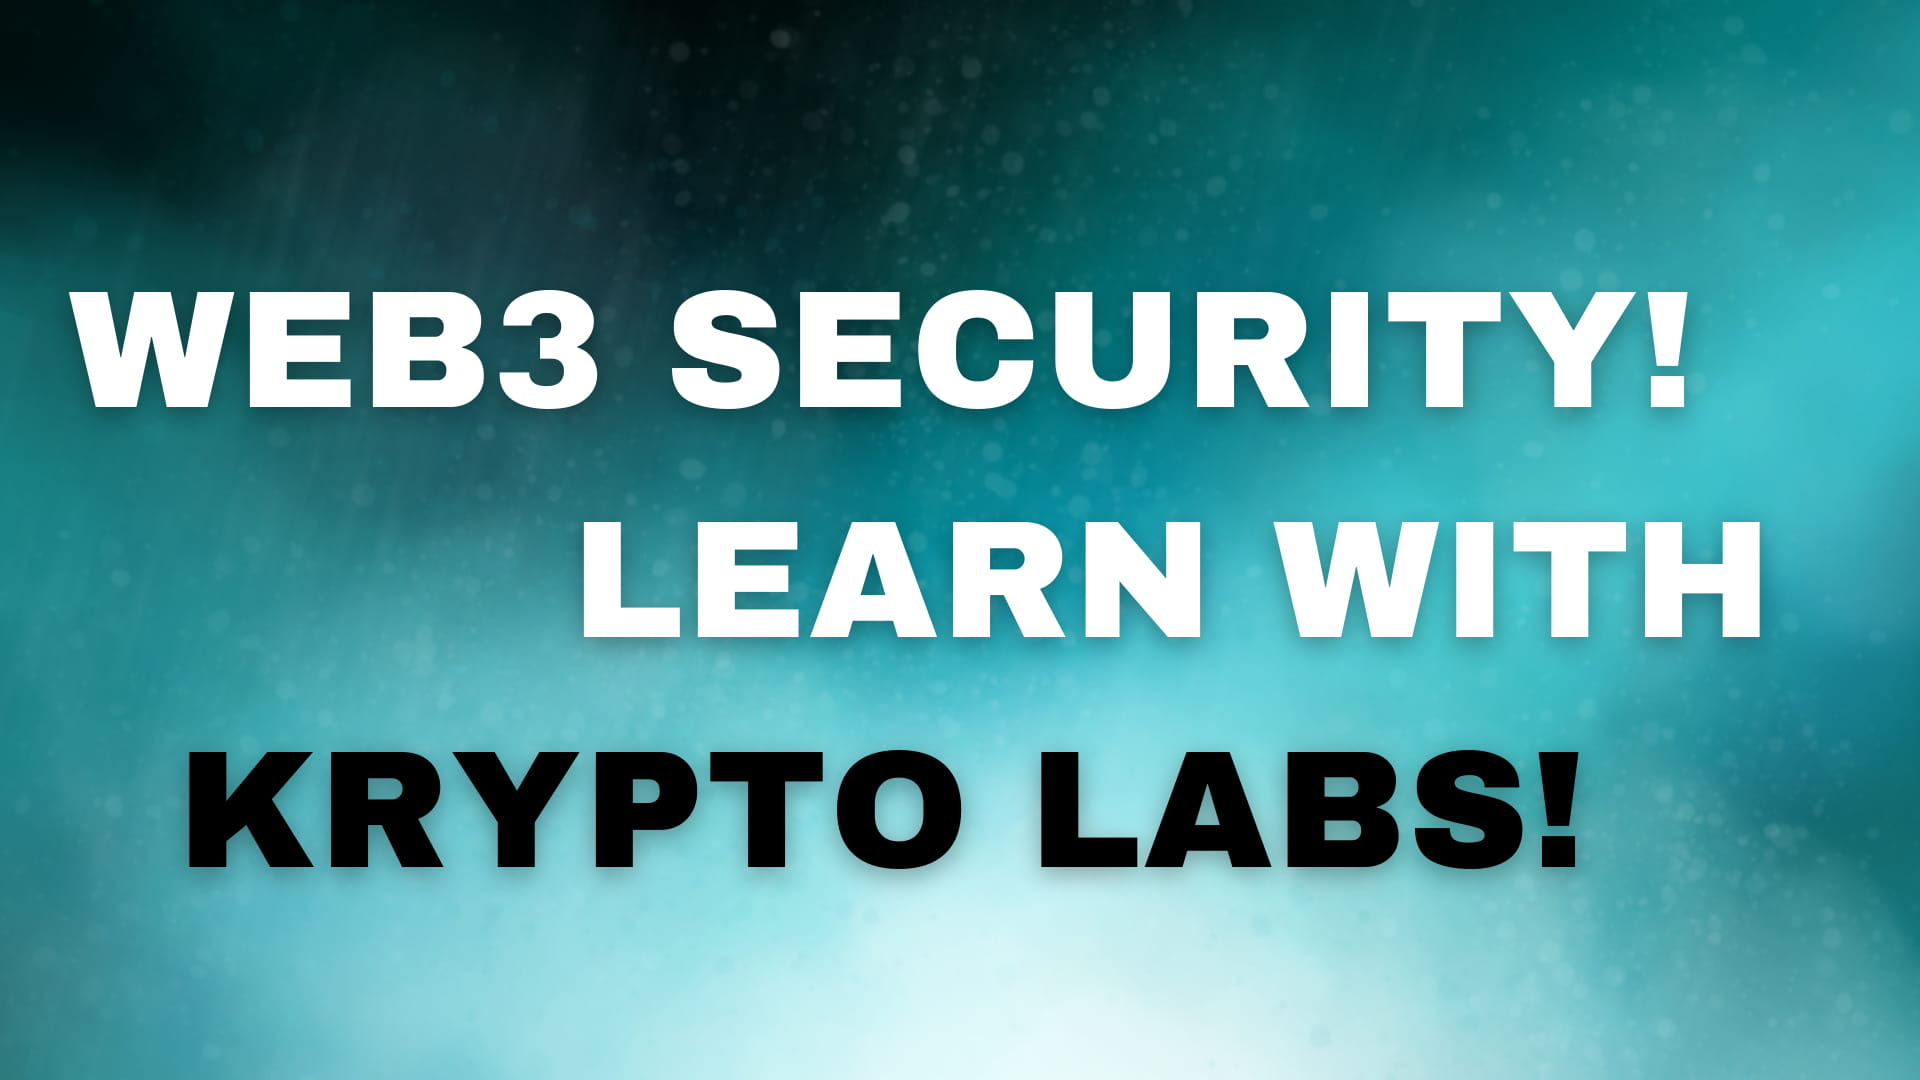 WEB3 WALLET SECURITY - WITH KRYPTO LABS